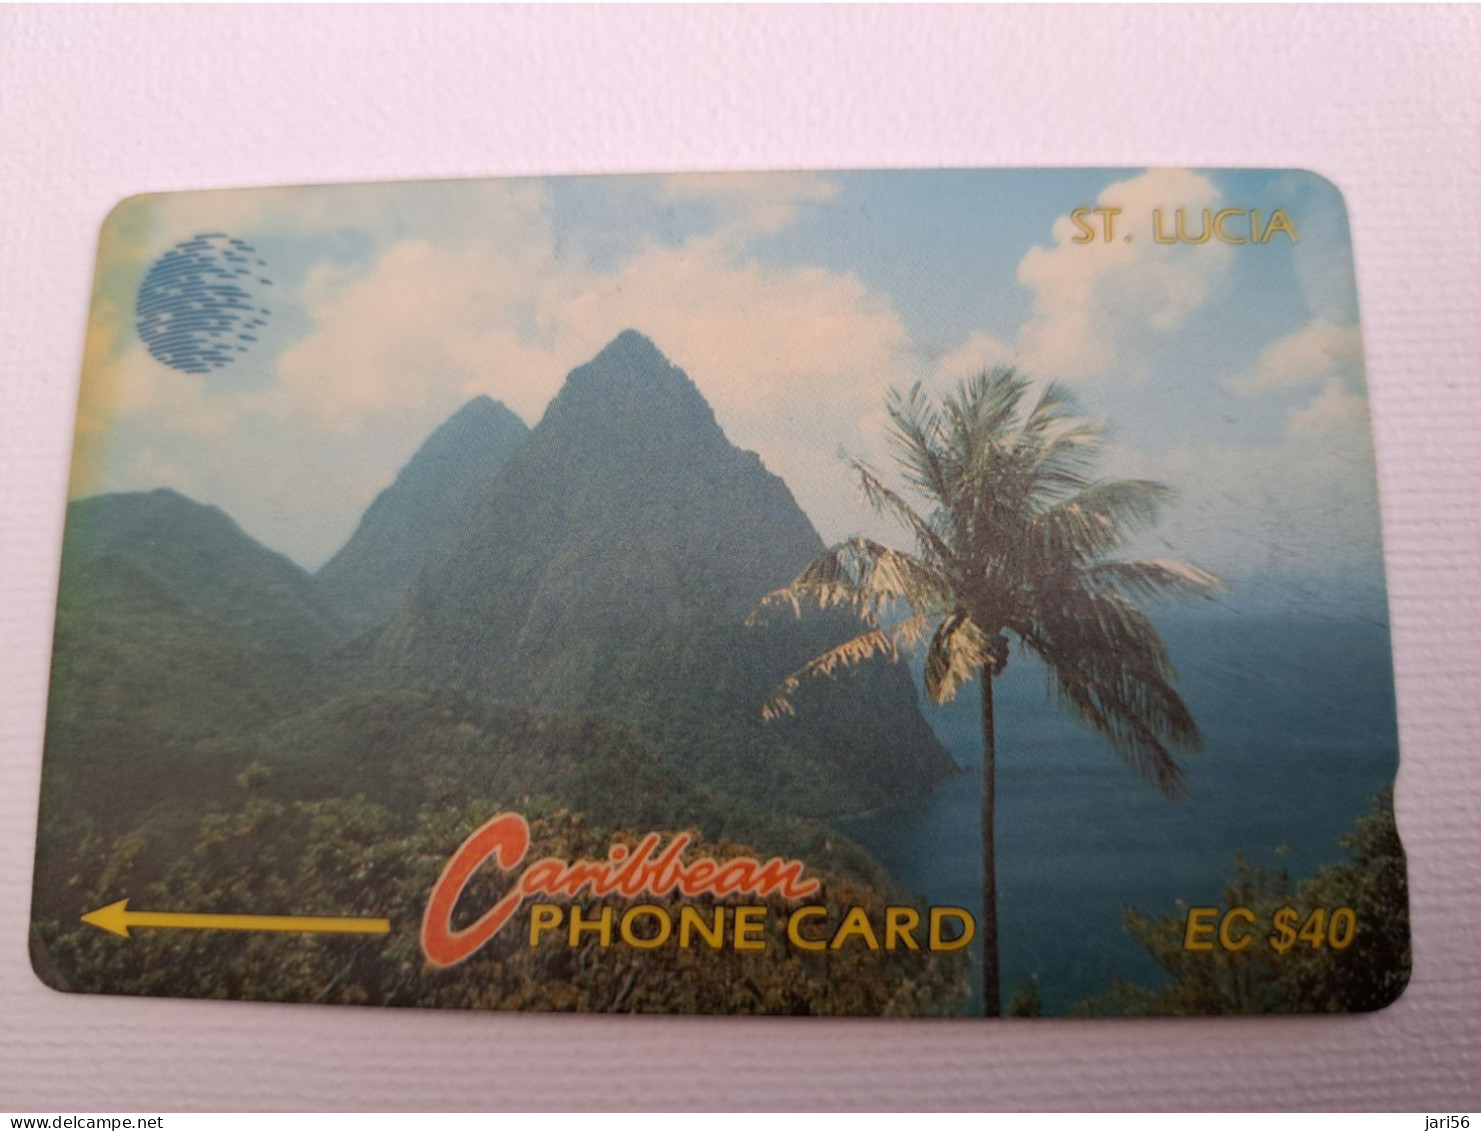 ST LUCIA    $ 40  CABLE & WIRELESS  STL-9C  9CSLC      Fine Used Card ** 13524** - St. Lucia